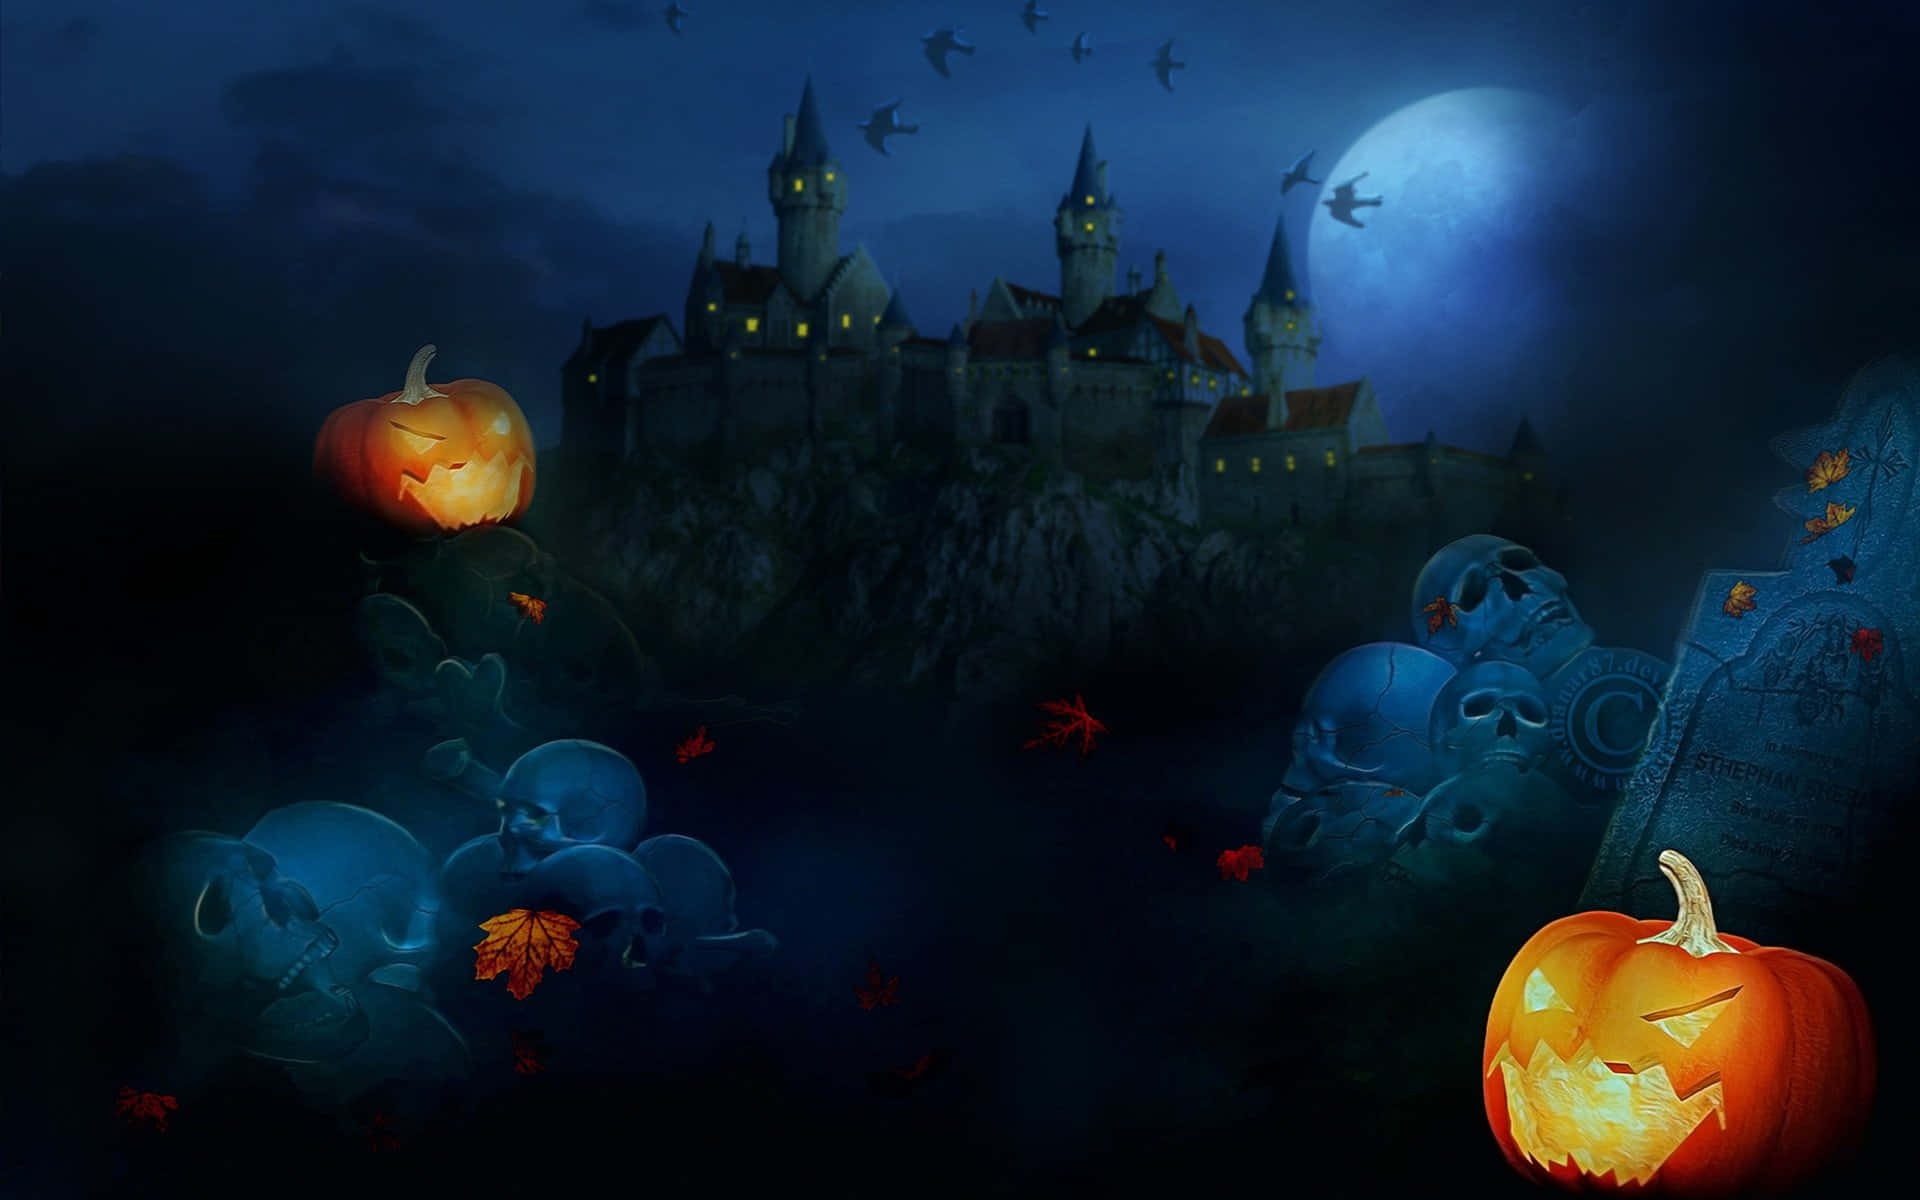 Get excited for a spooky and mysterious Halloween night!